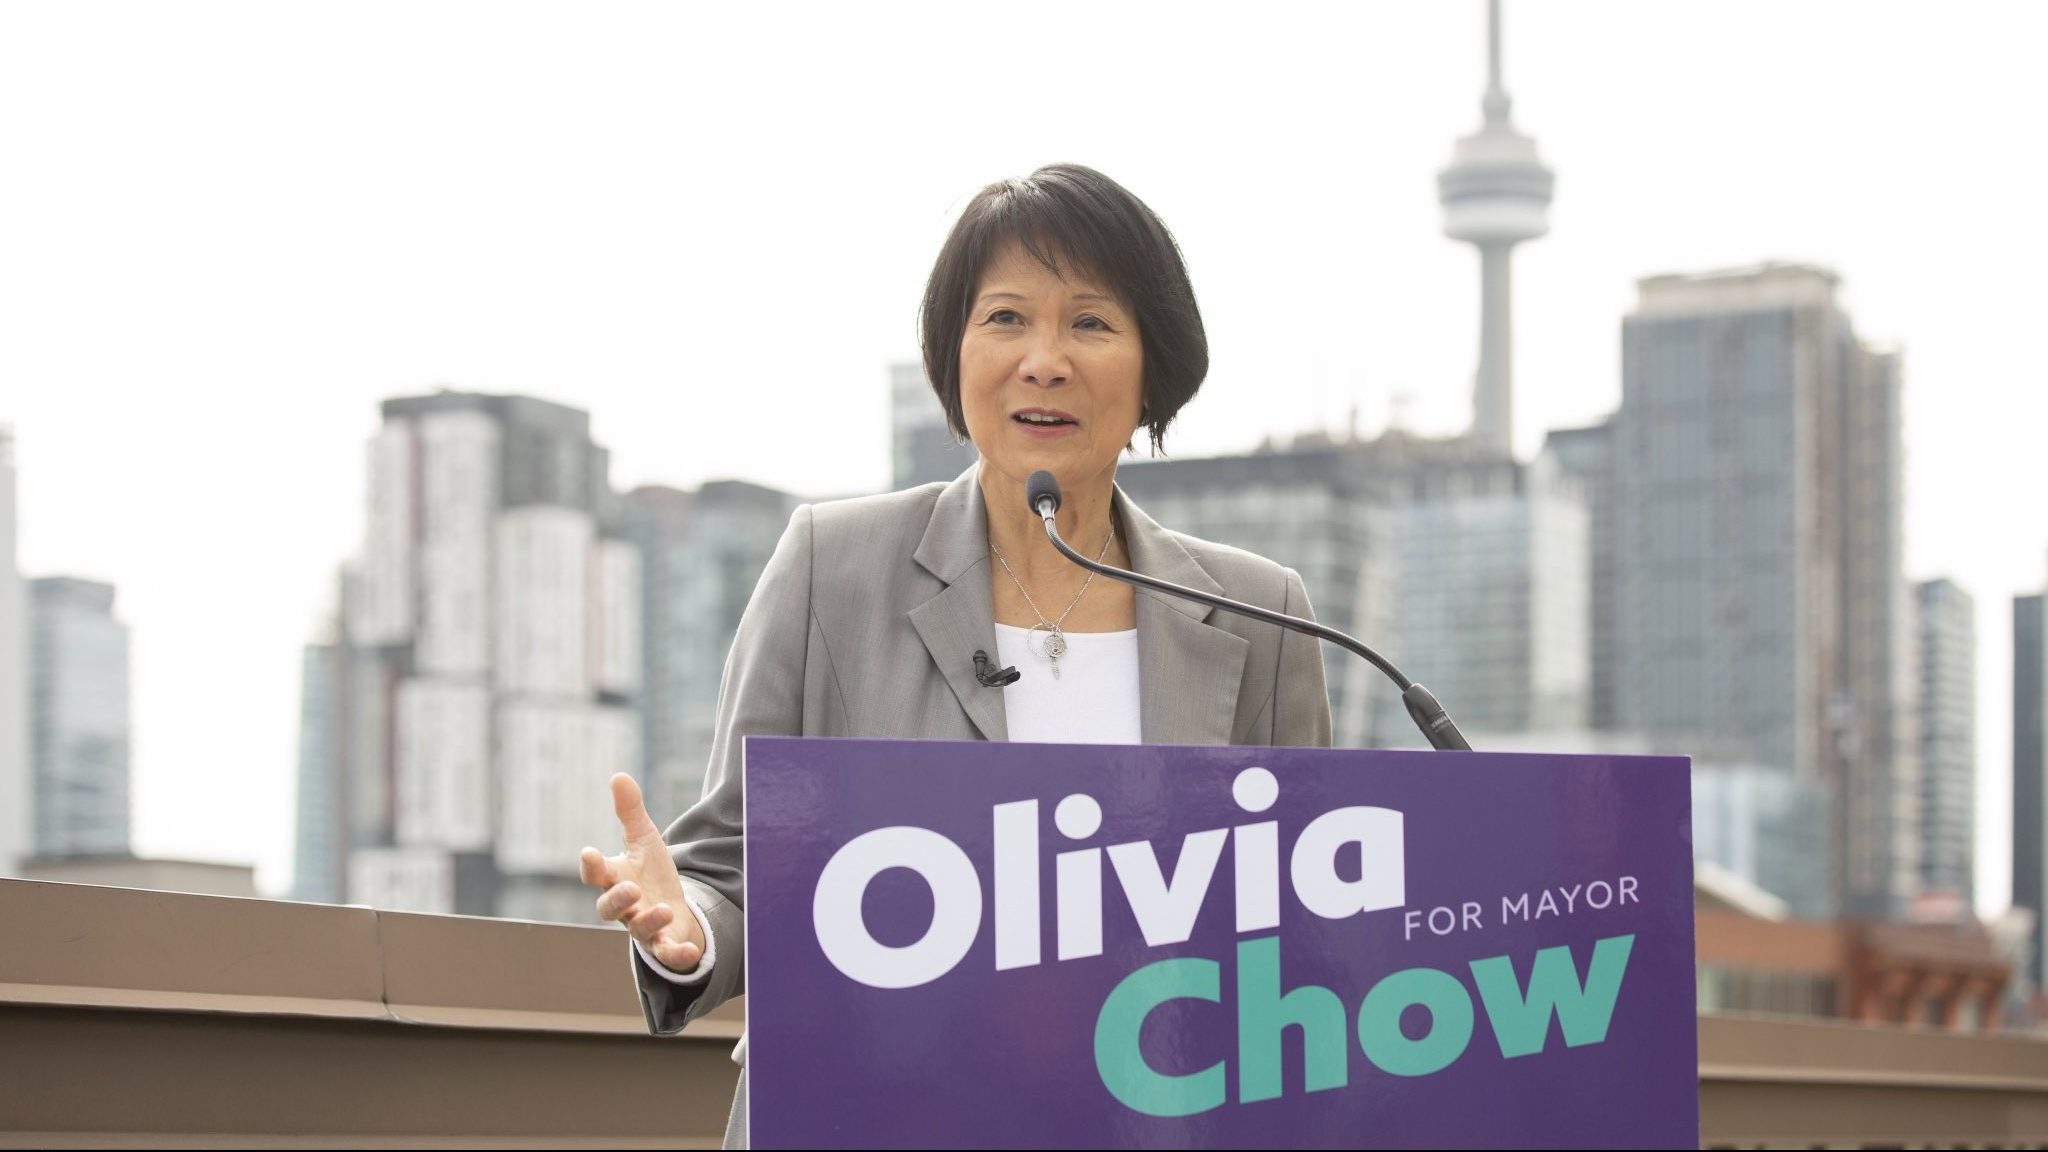 Olivia Chow maintains doubledigit lead in latest mayoral race poll